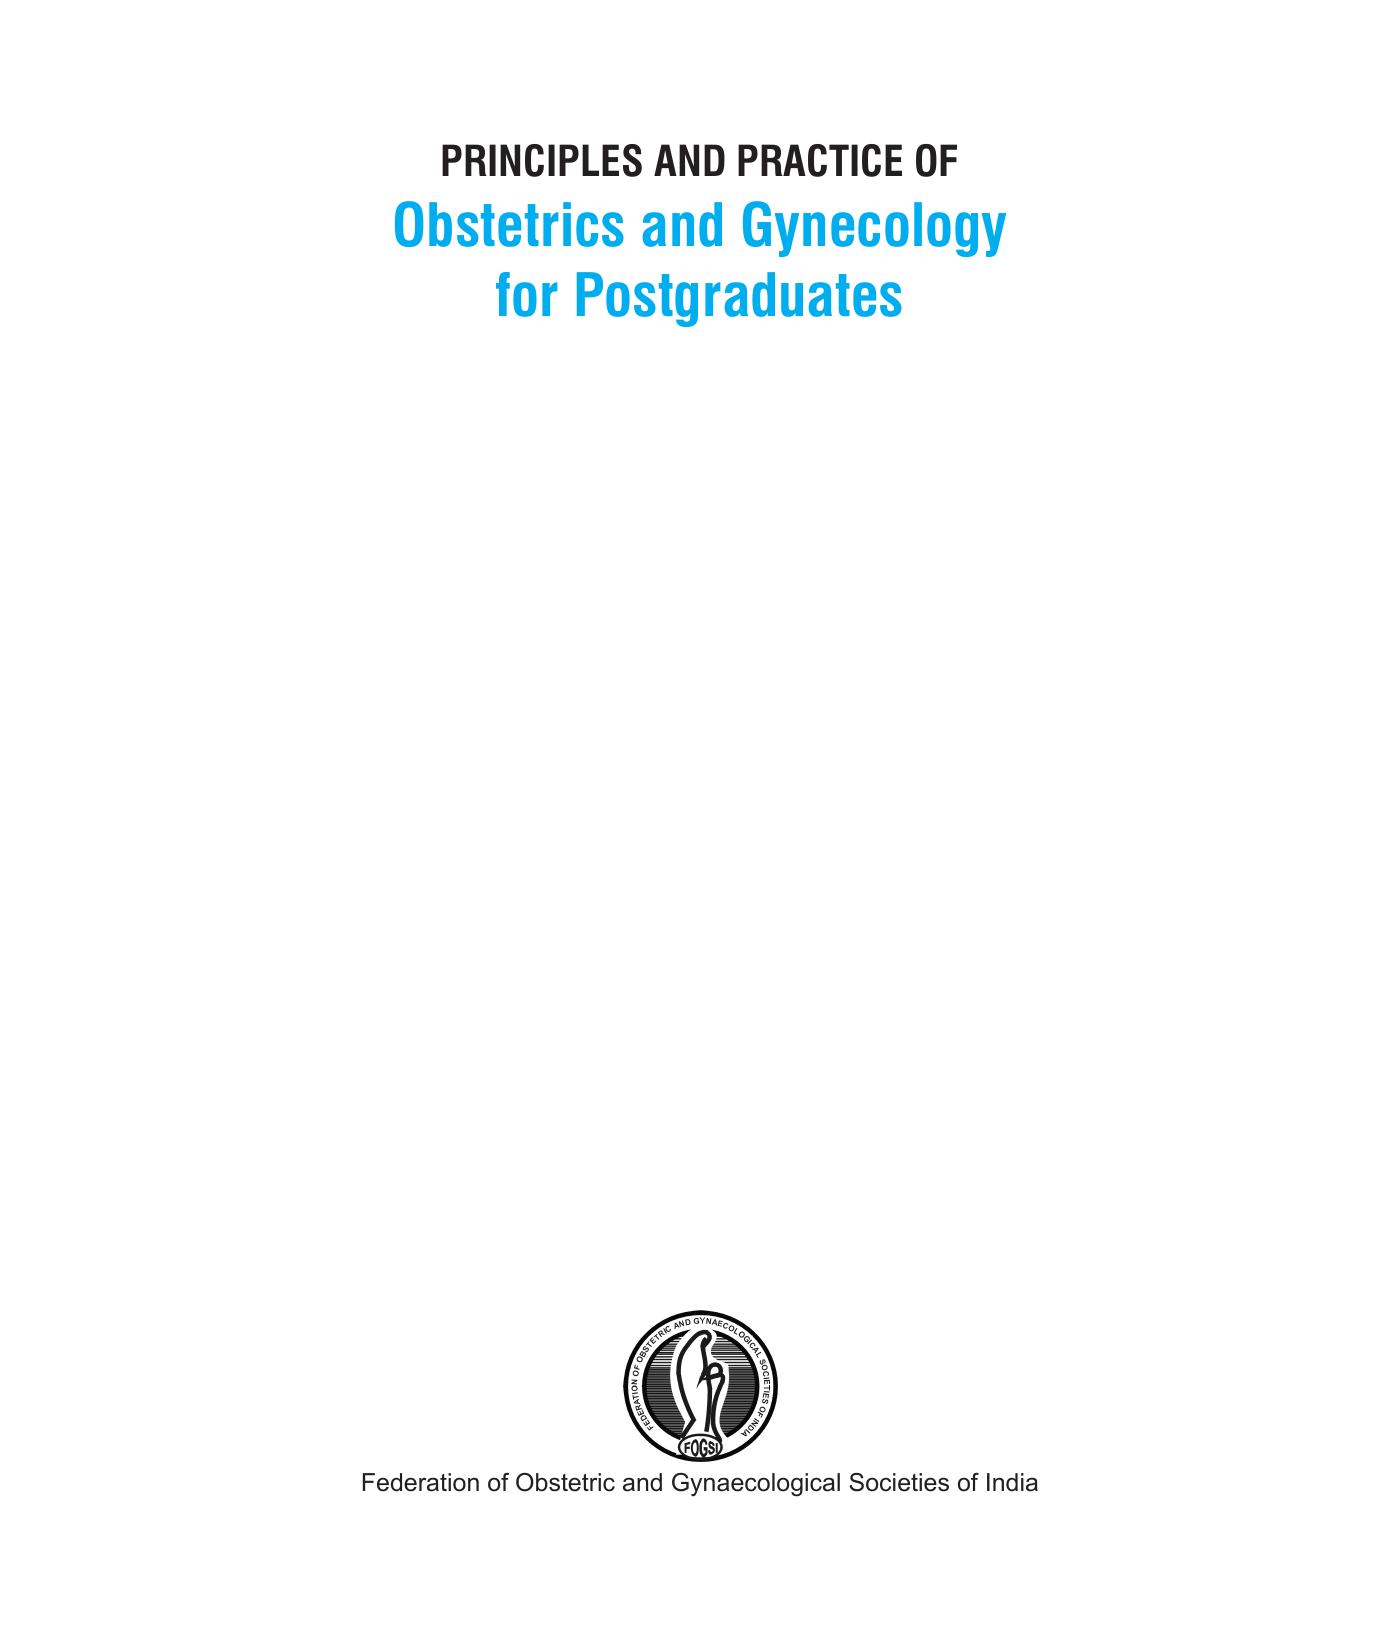 Principles and Practice of Obstetrics and Gynecology for Postgraduates 4th ed 2014